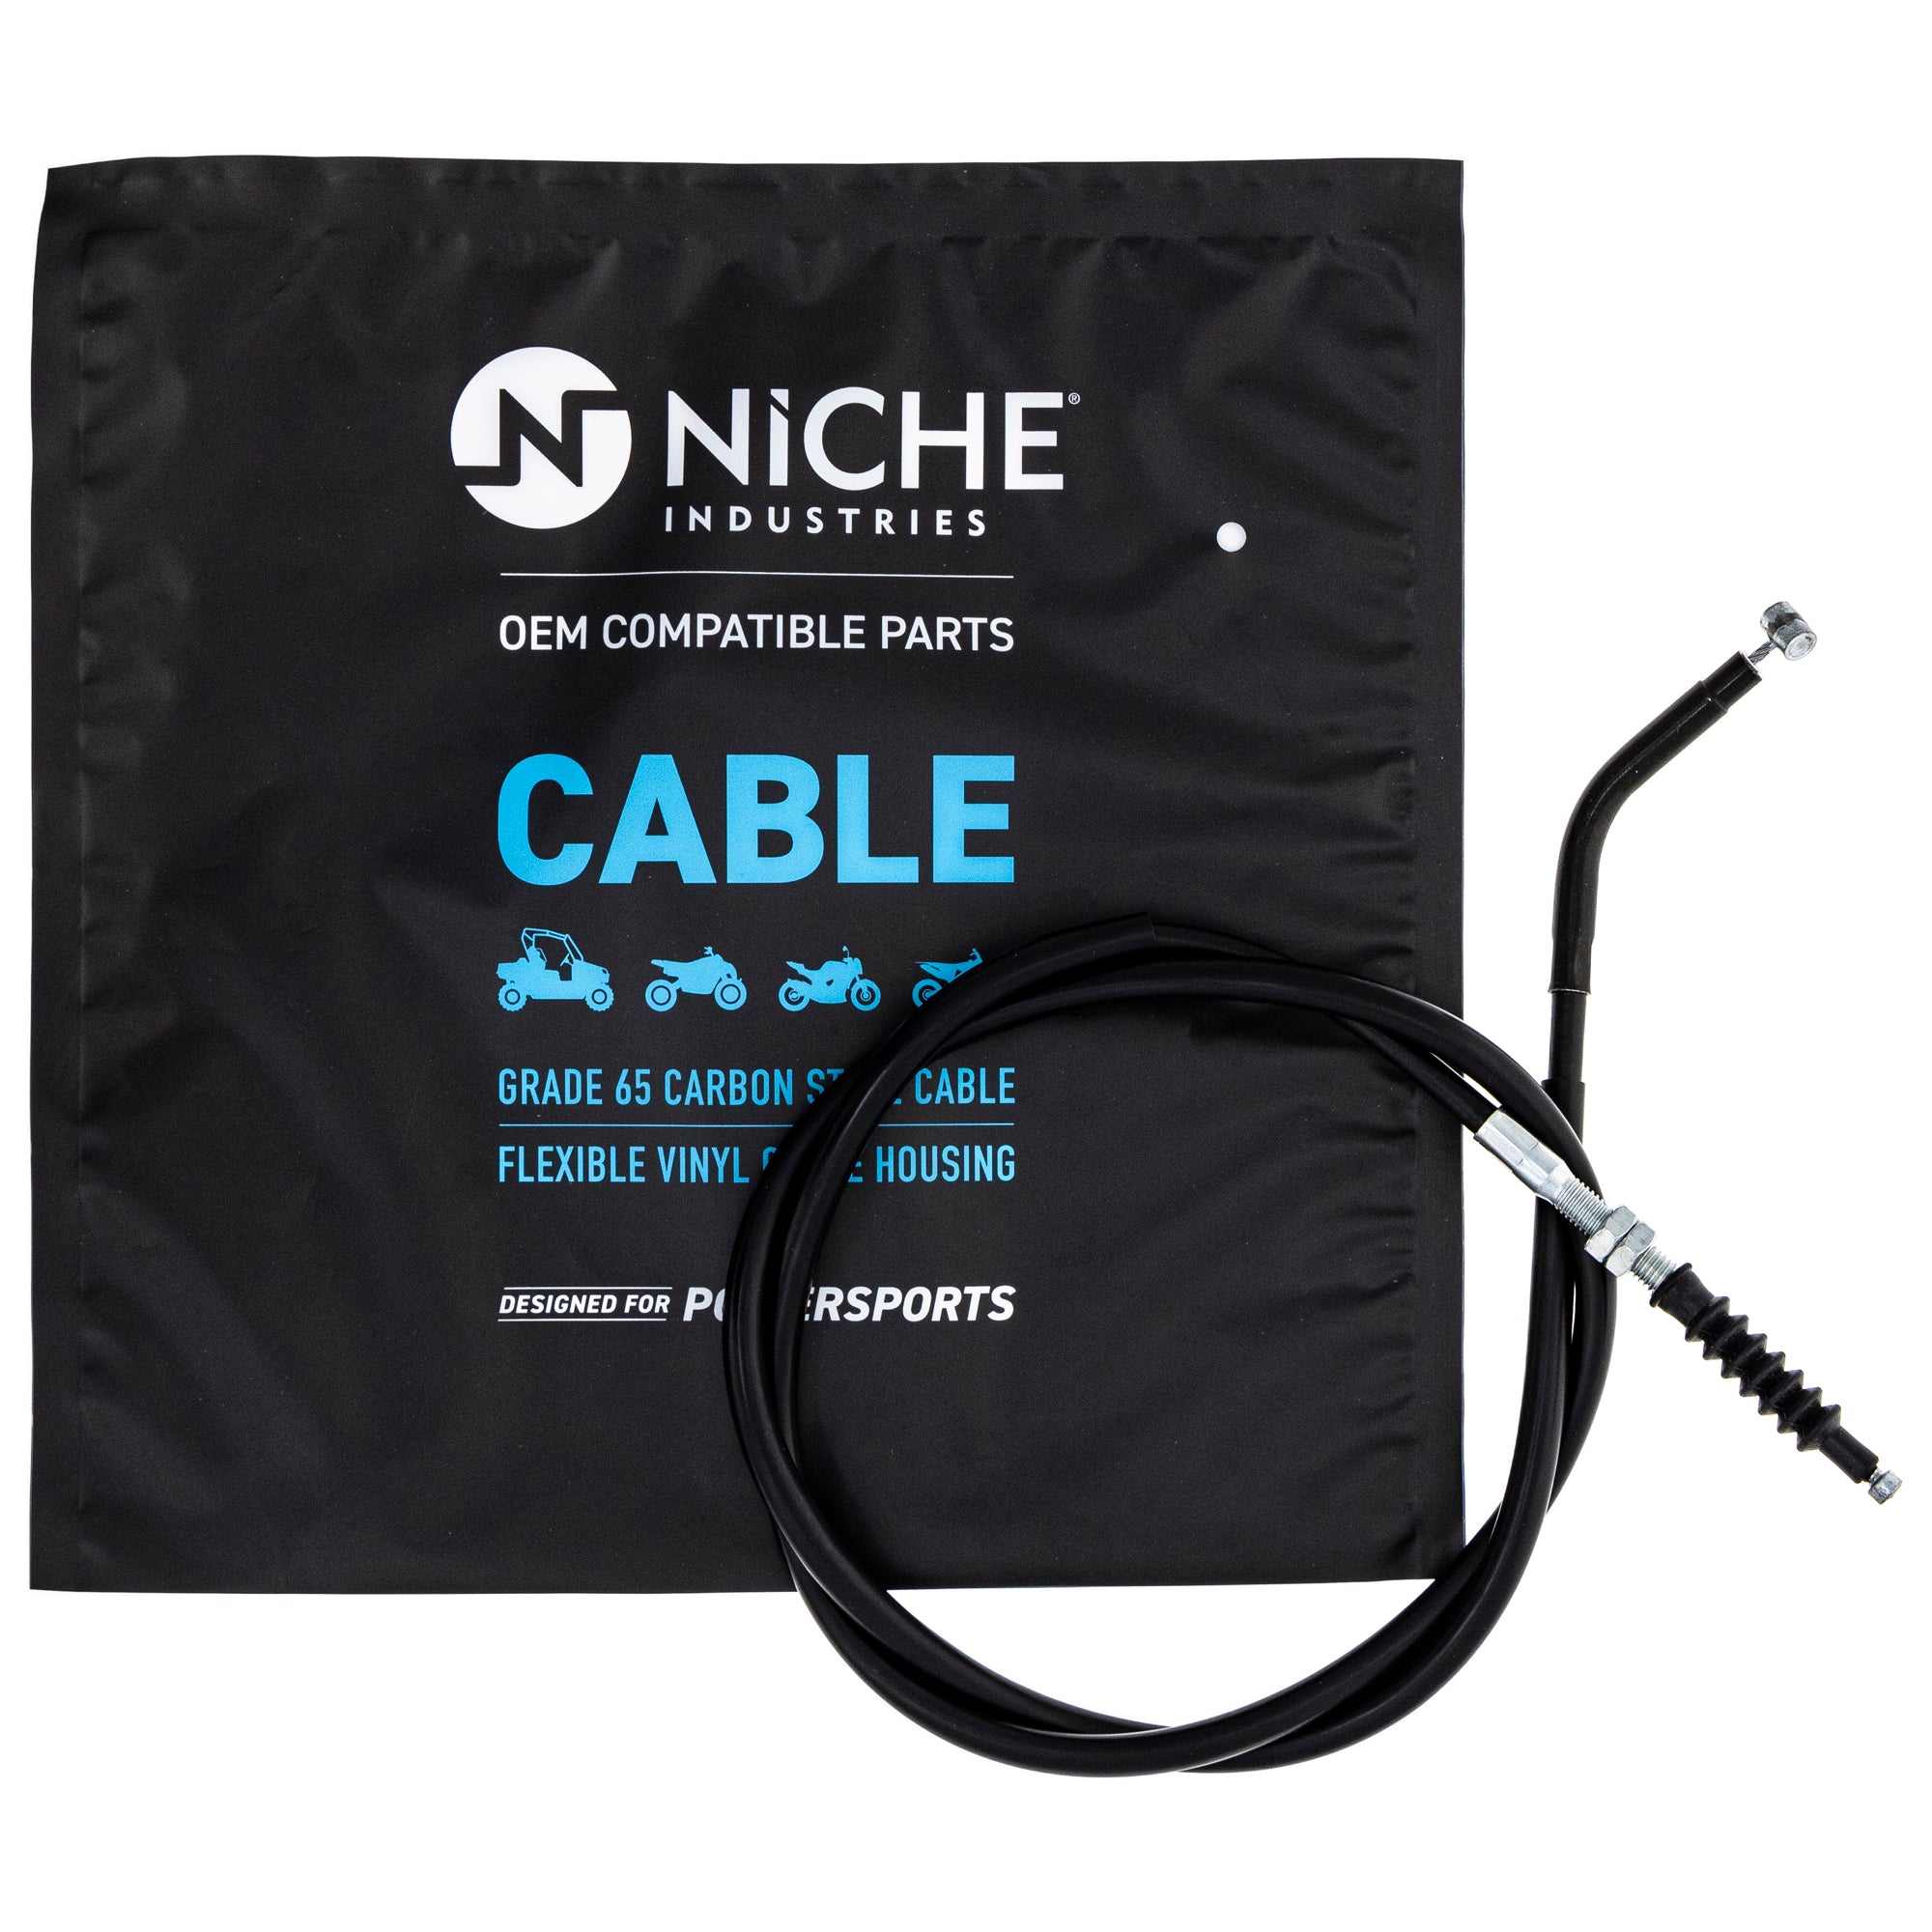 NICHE 519-CCB2594L Clutch Cable for zOTHER Ninja GPz550